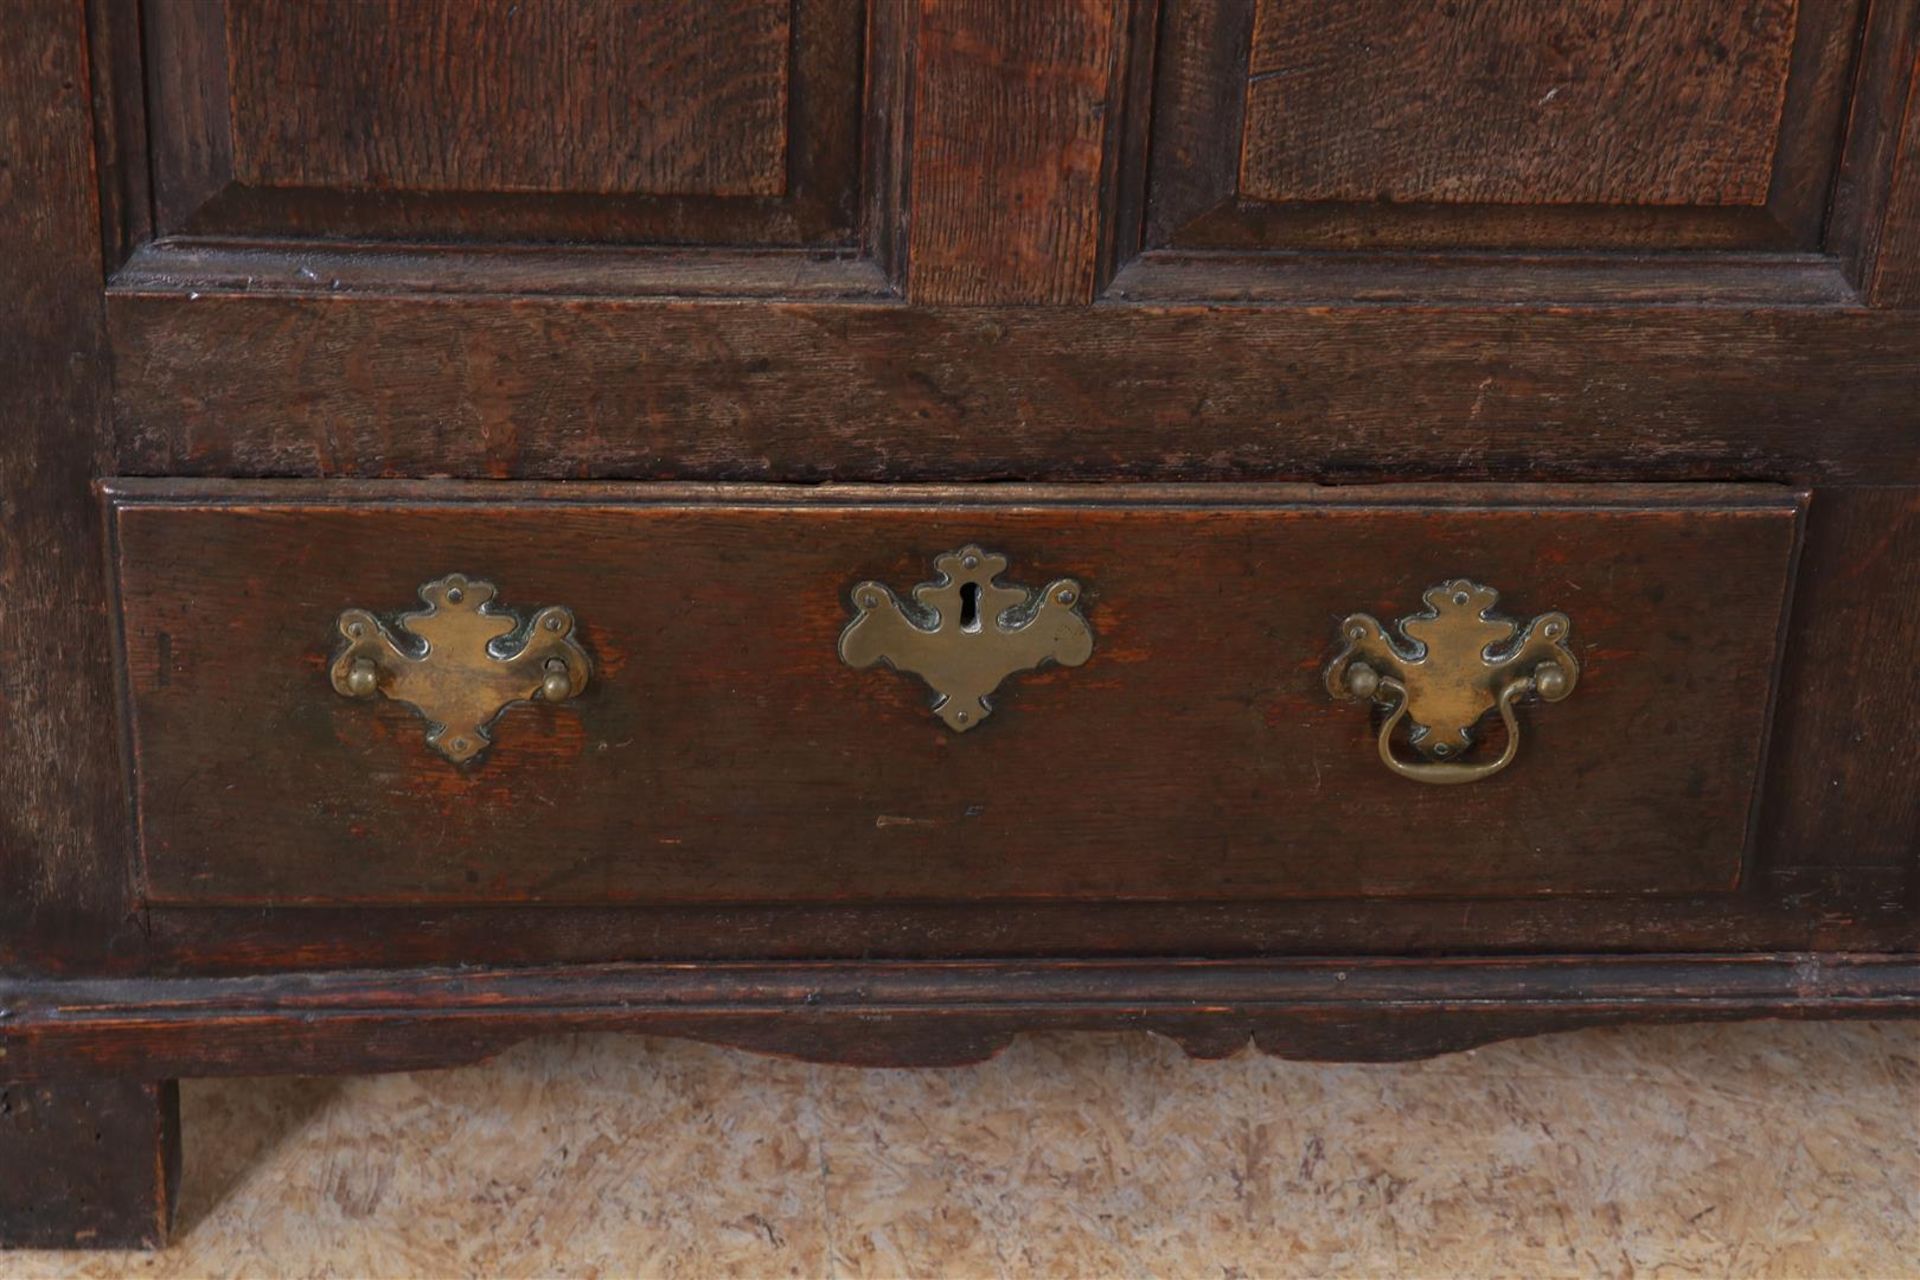 Oak Georgian chest with 4 front panels and 2 drawers with bronze fittings and lock plate, England - Image 4 of 5